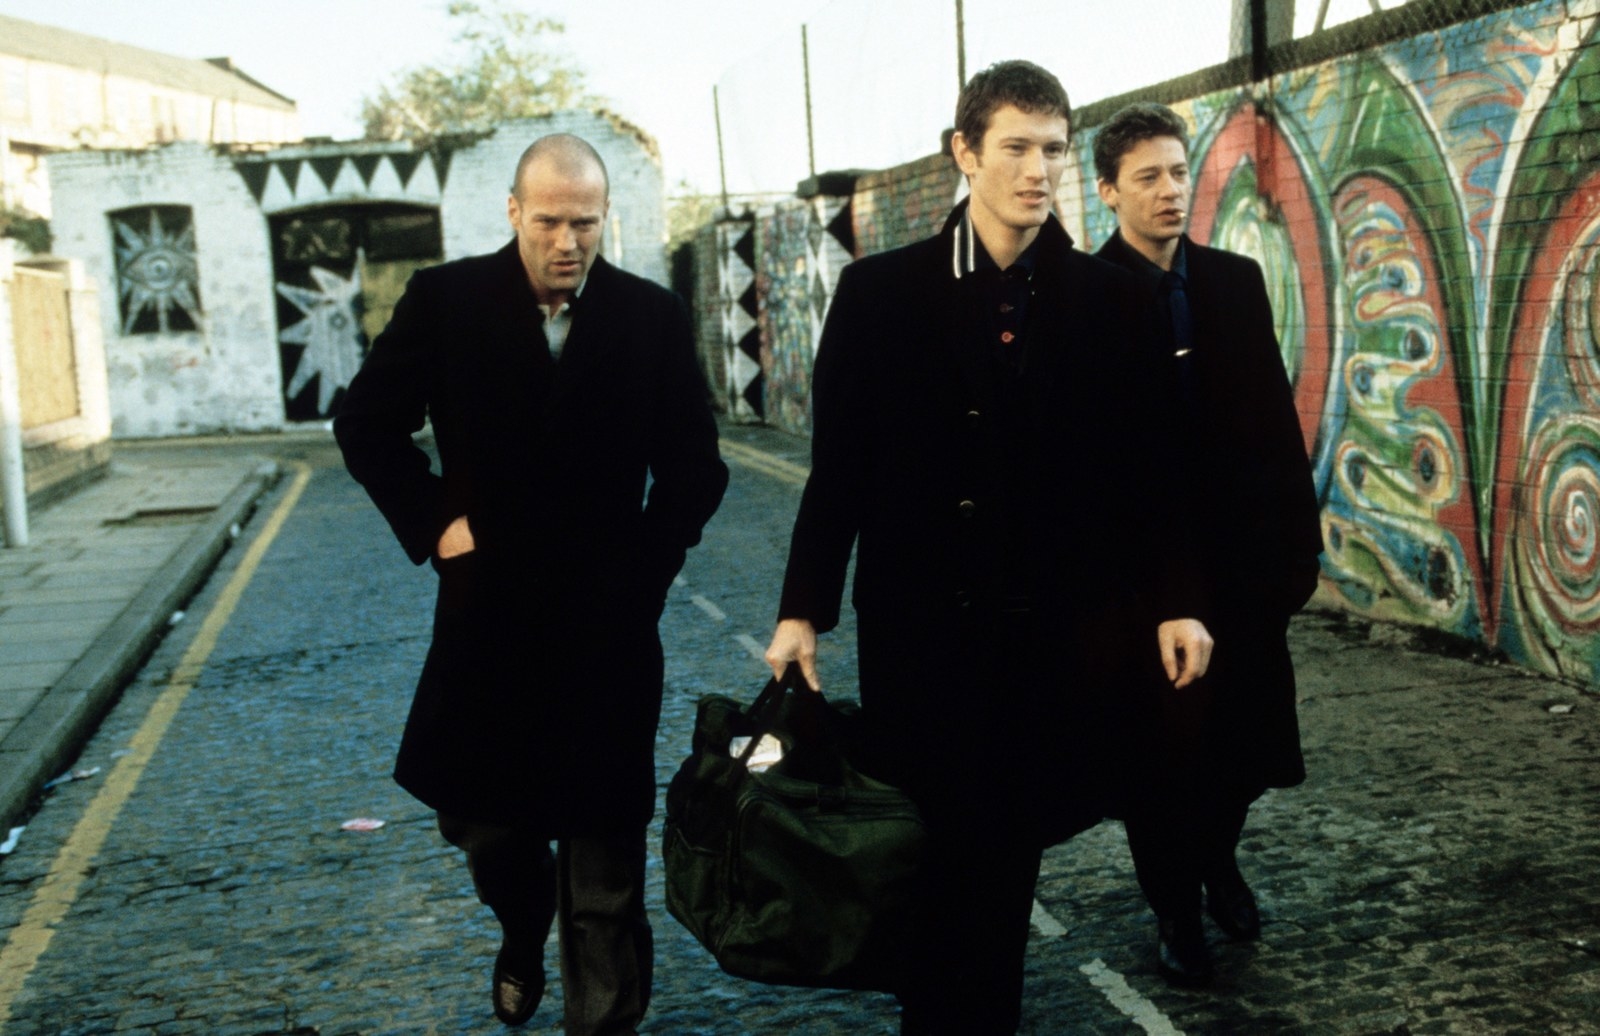 11 Of The Most Stylish Moments In British Cinema